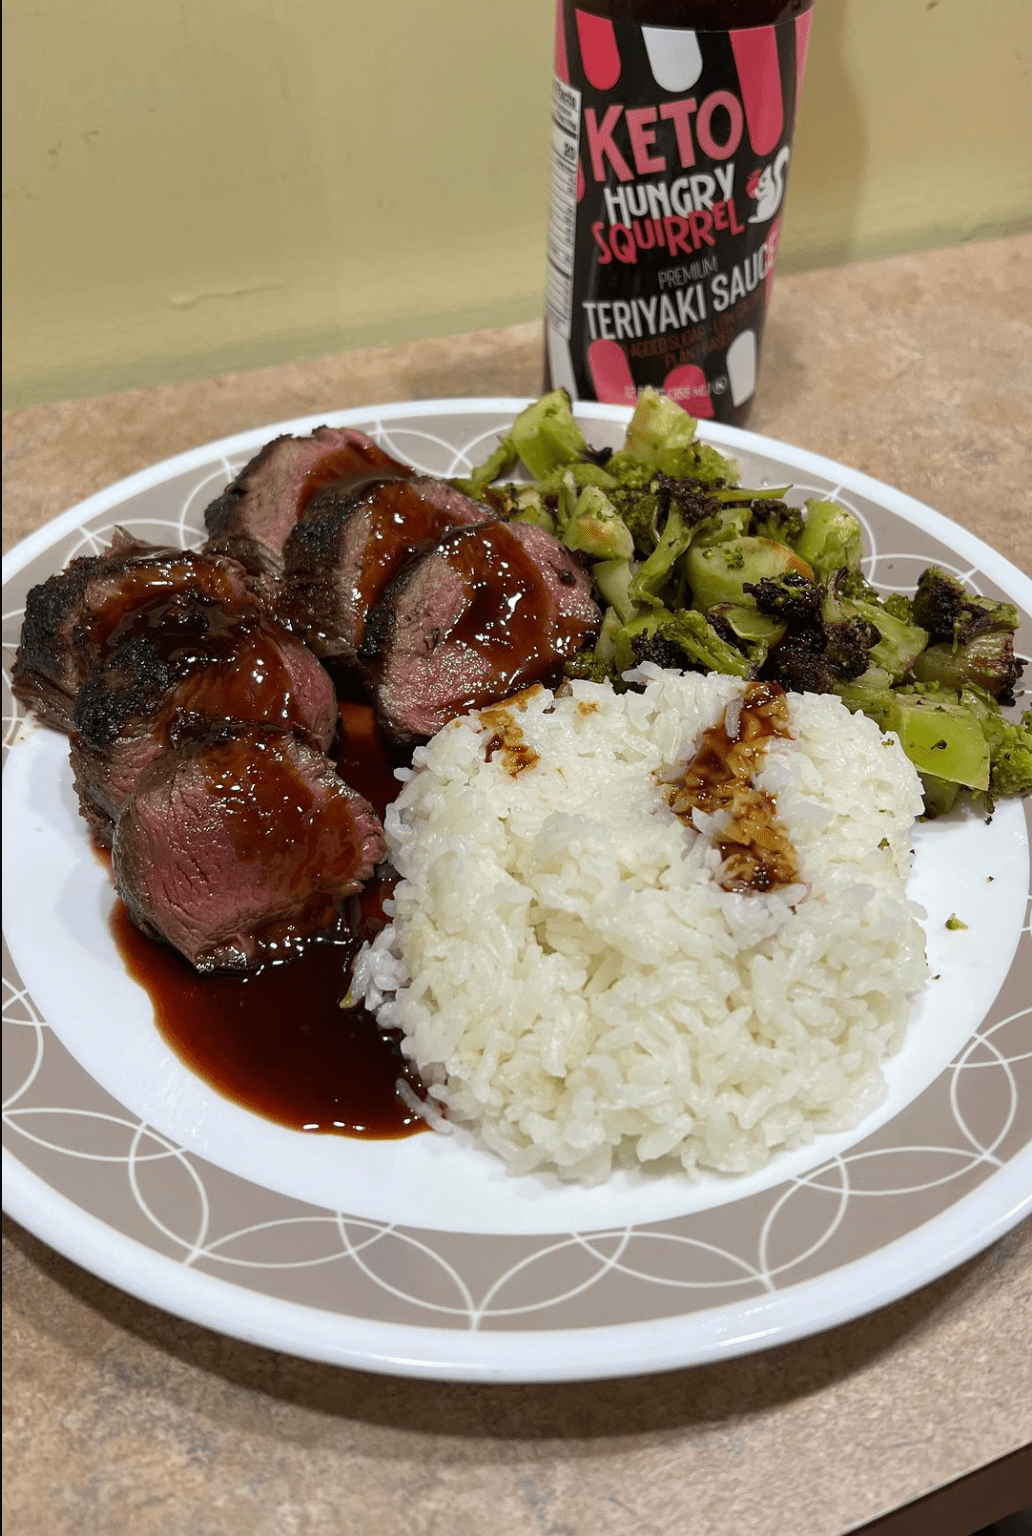 A plate of Seared Teriyaki Glazed Venison Backstrap, with rice and brocolli. - Hungry Squirrel Teriyaki Sauce on the background.- From Instagram follower:  @jimmydean1147